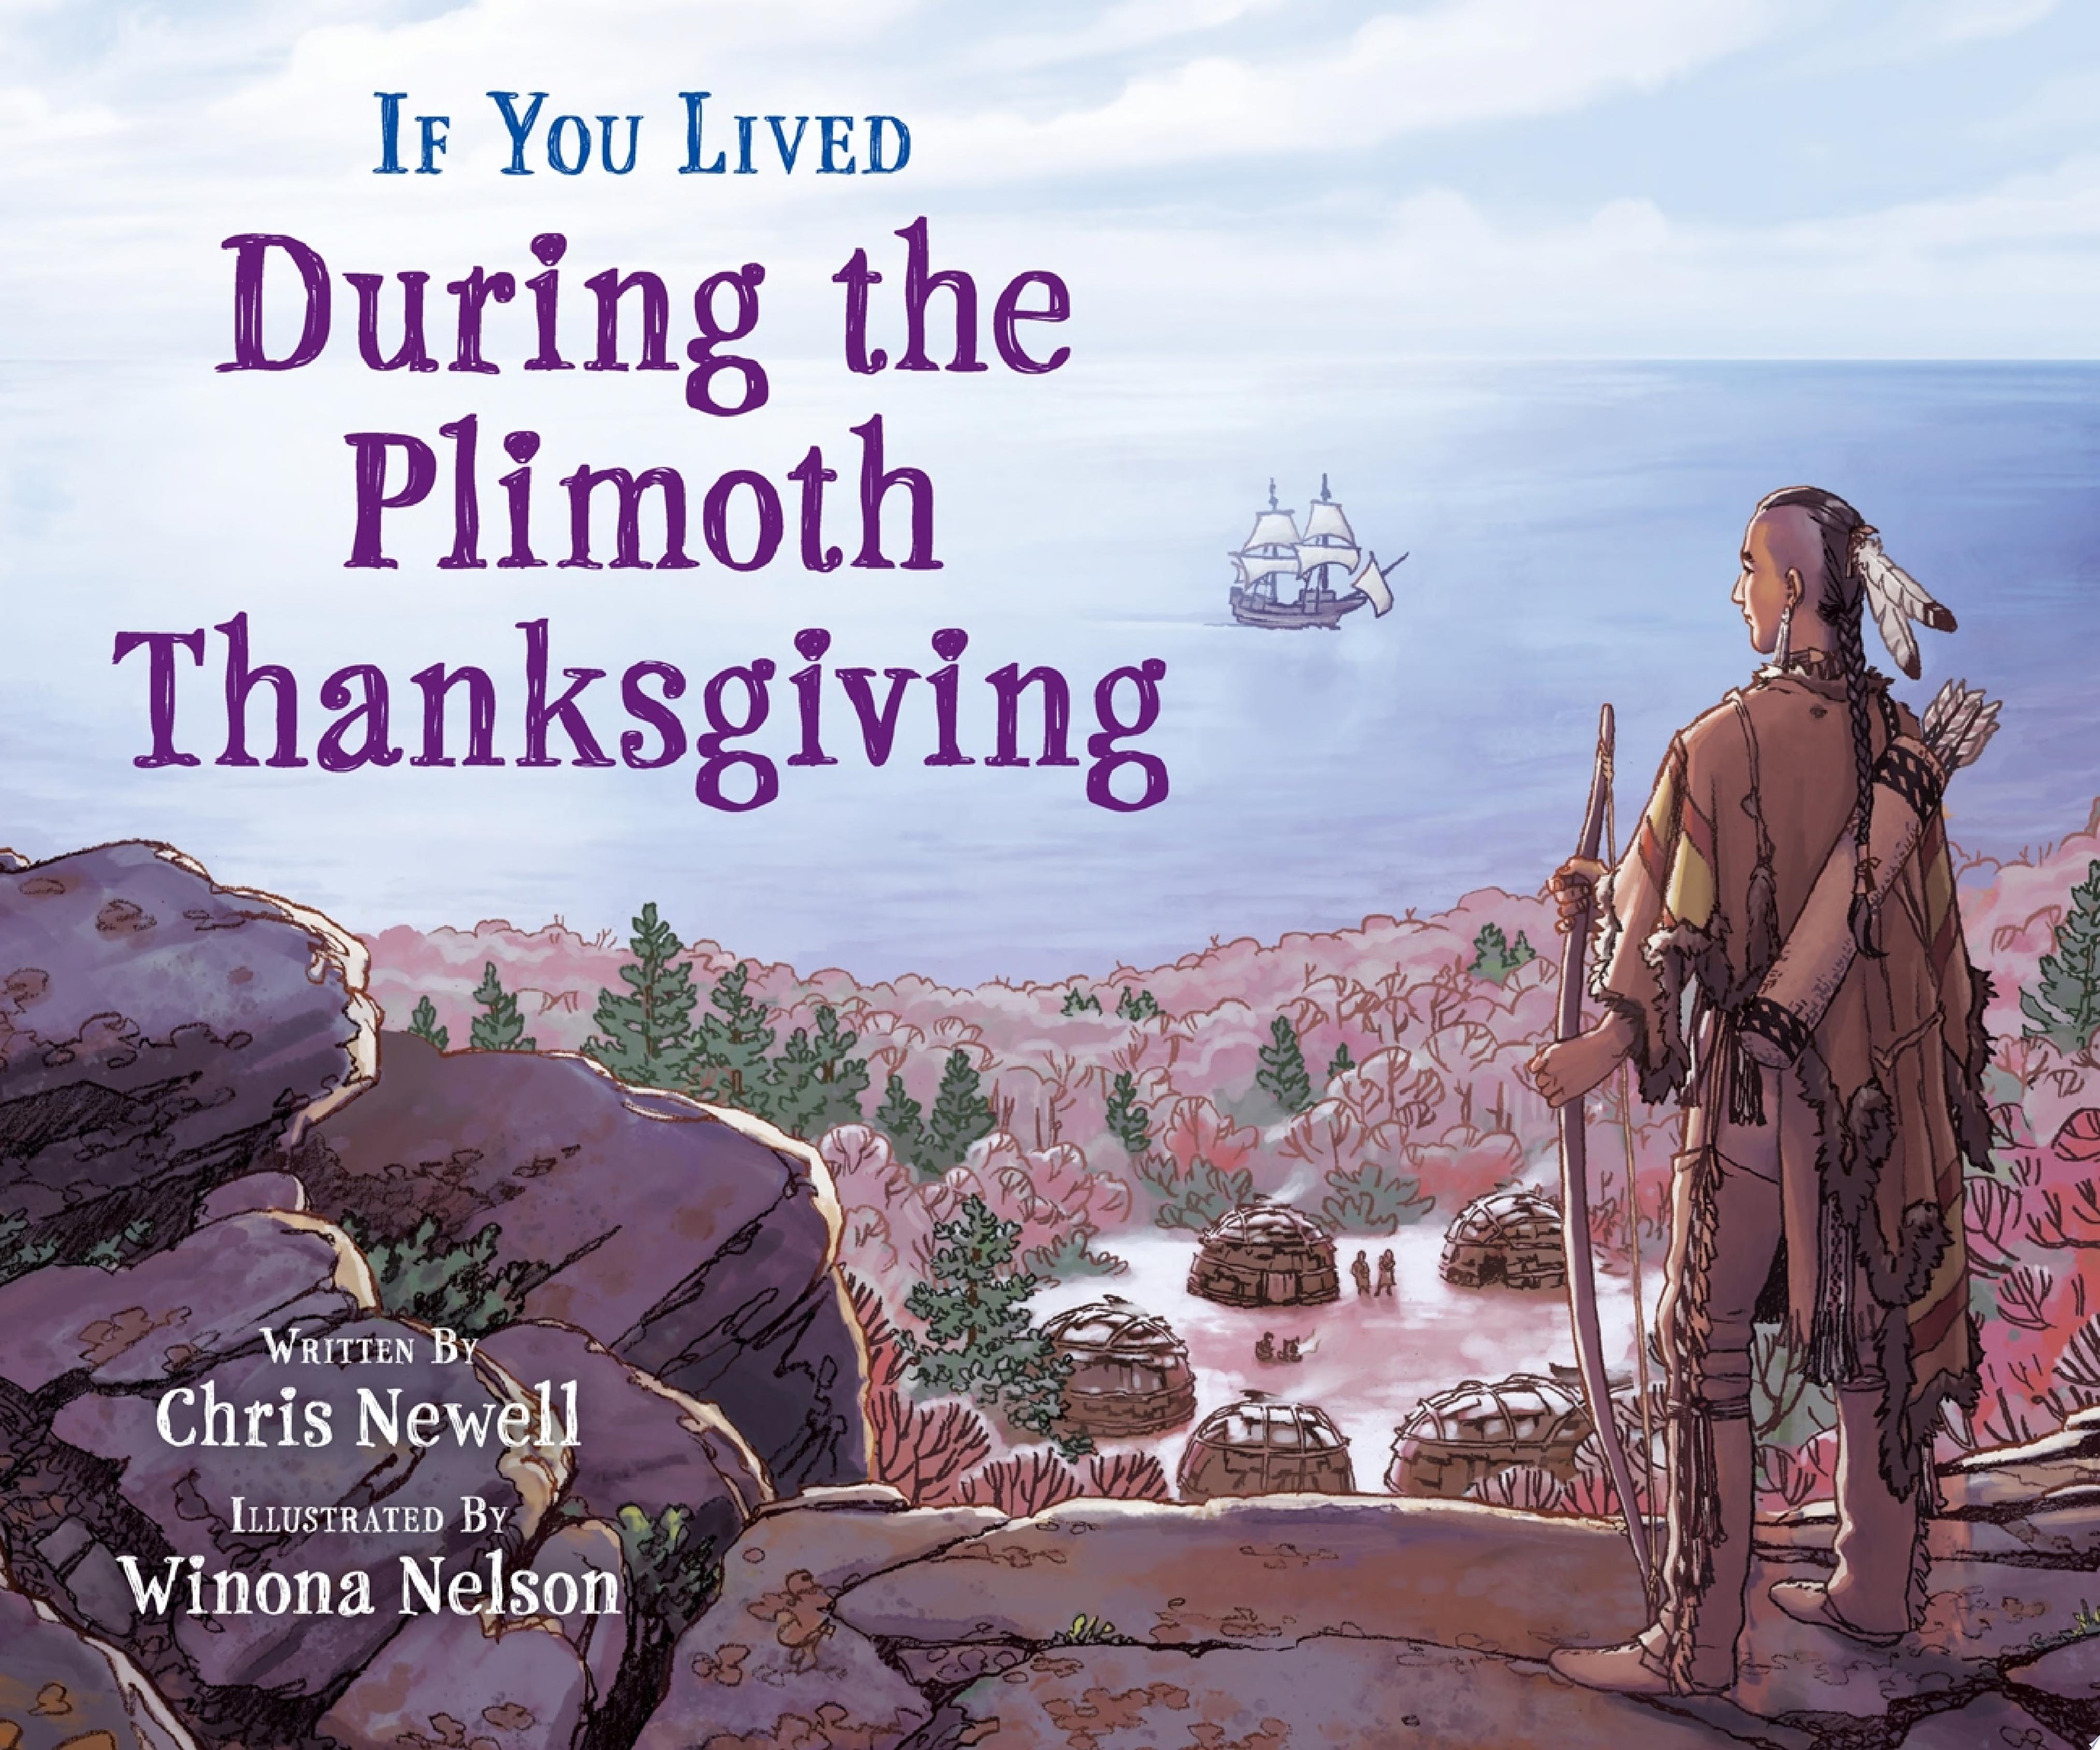 Image for "If You Lived During the Plimoth Thanksgiving"